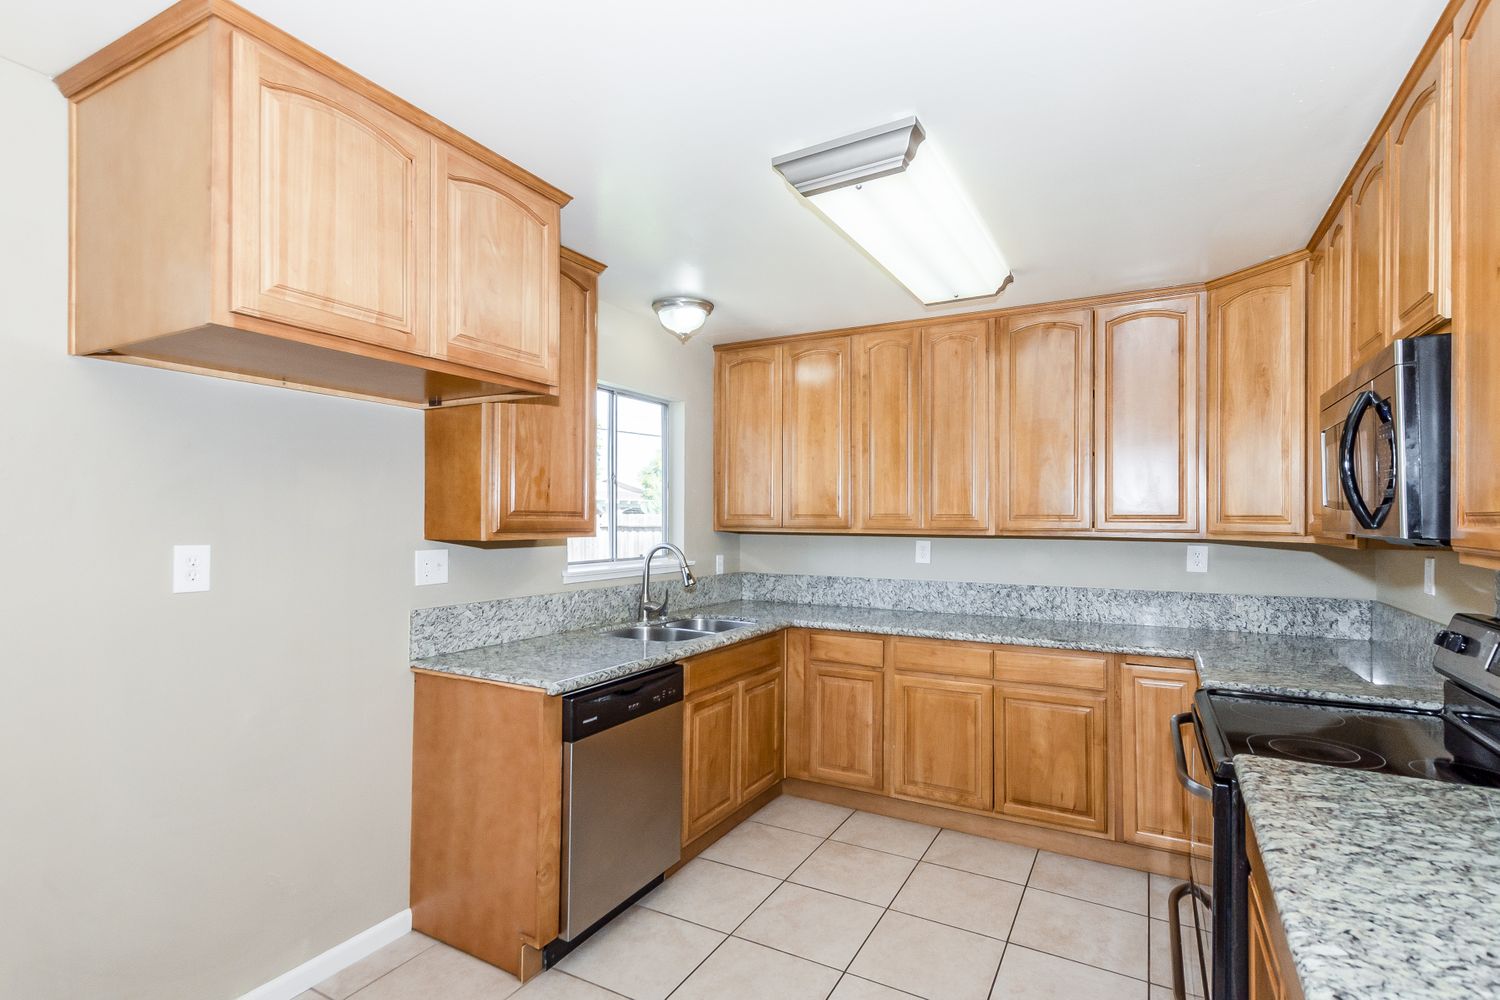 Kitchen with granite countertops, rich wood cabinets, and easy to care for tile at Invitation Homes Northern CA.